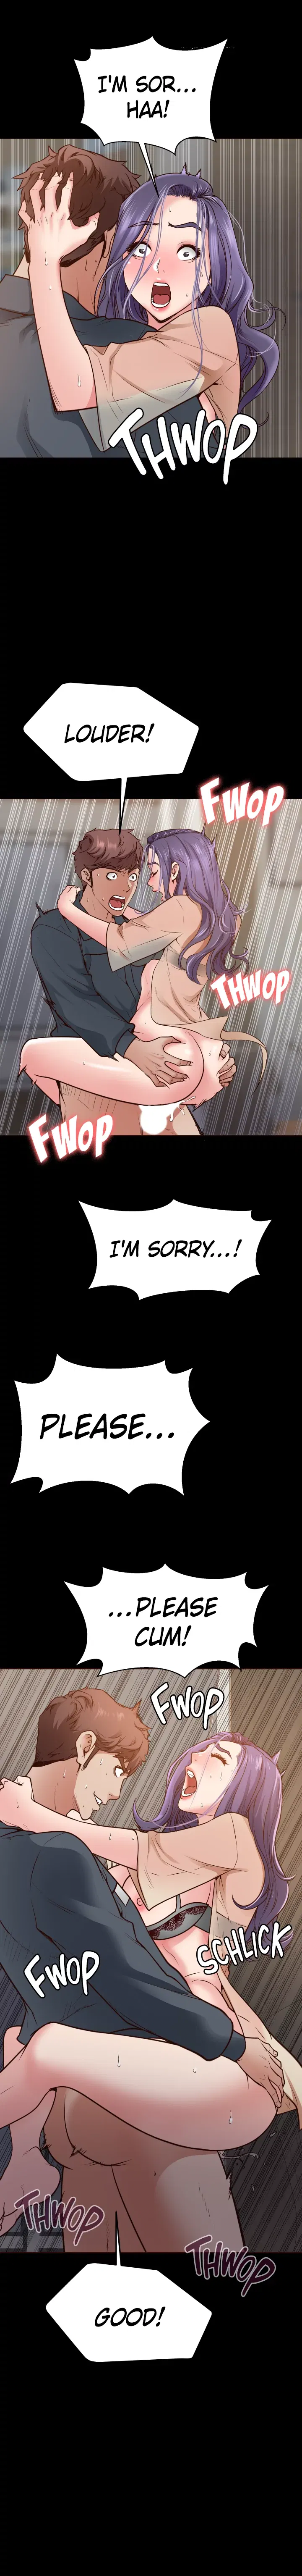 wrath-of-the-underdog-chap-3-8